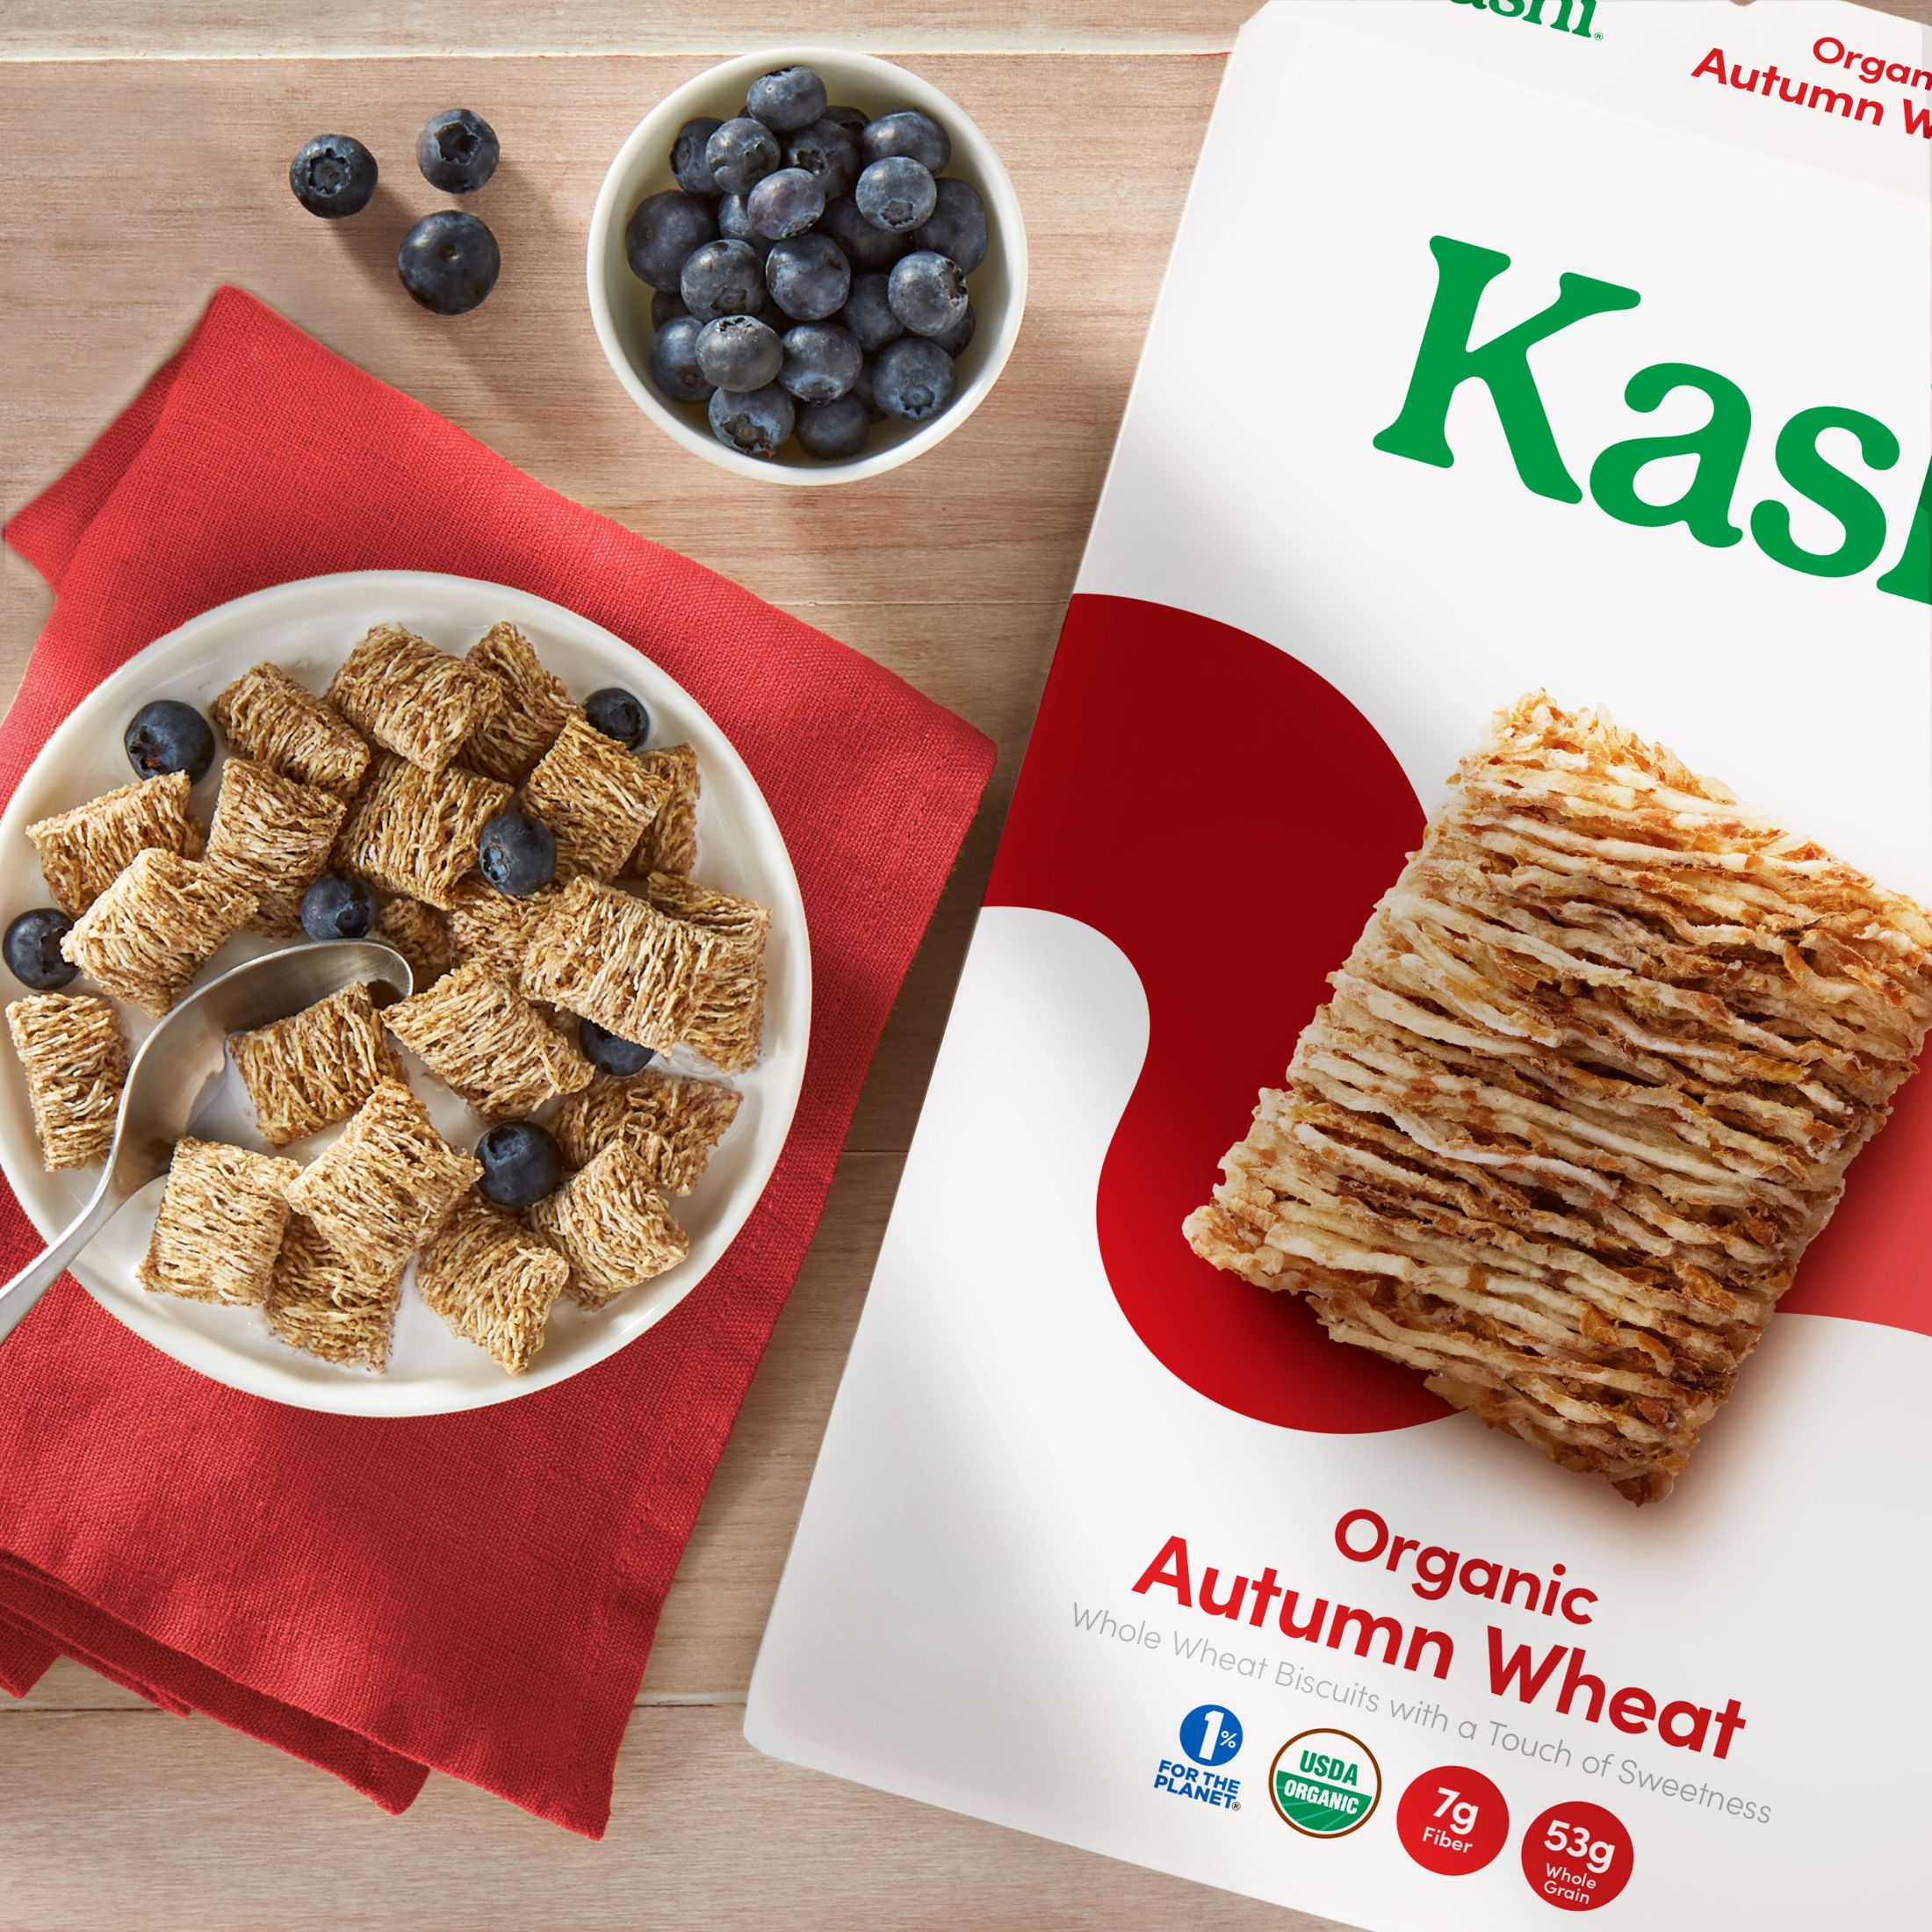 Kashi Autumn Wheat Cold Breakfast Cereal, 16.3 oz Box - image 3 of 12